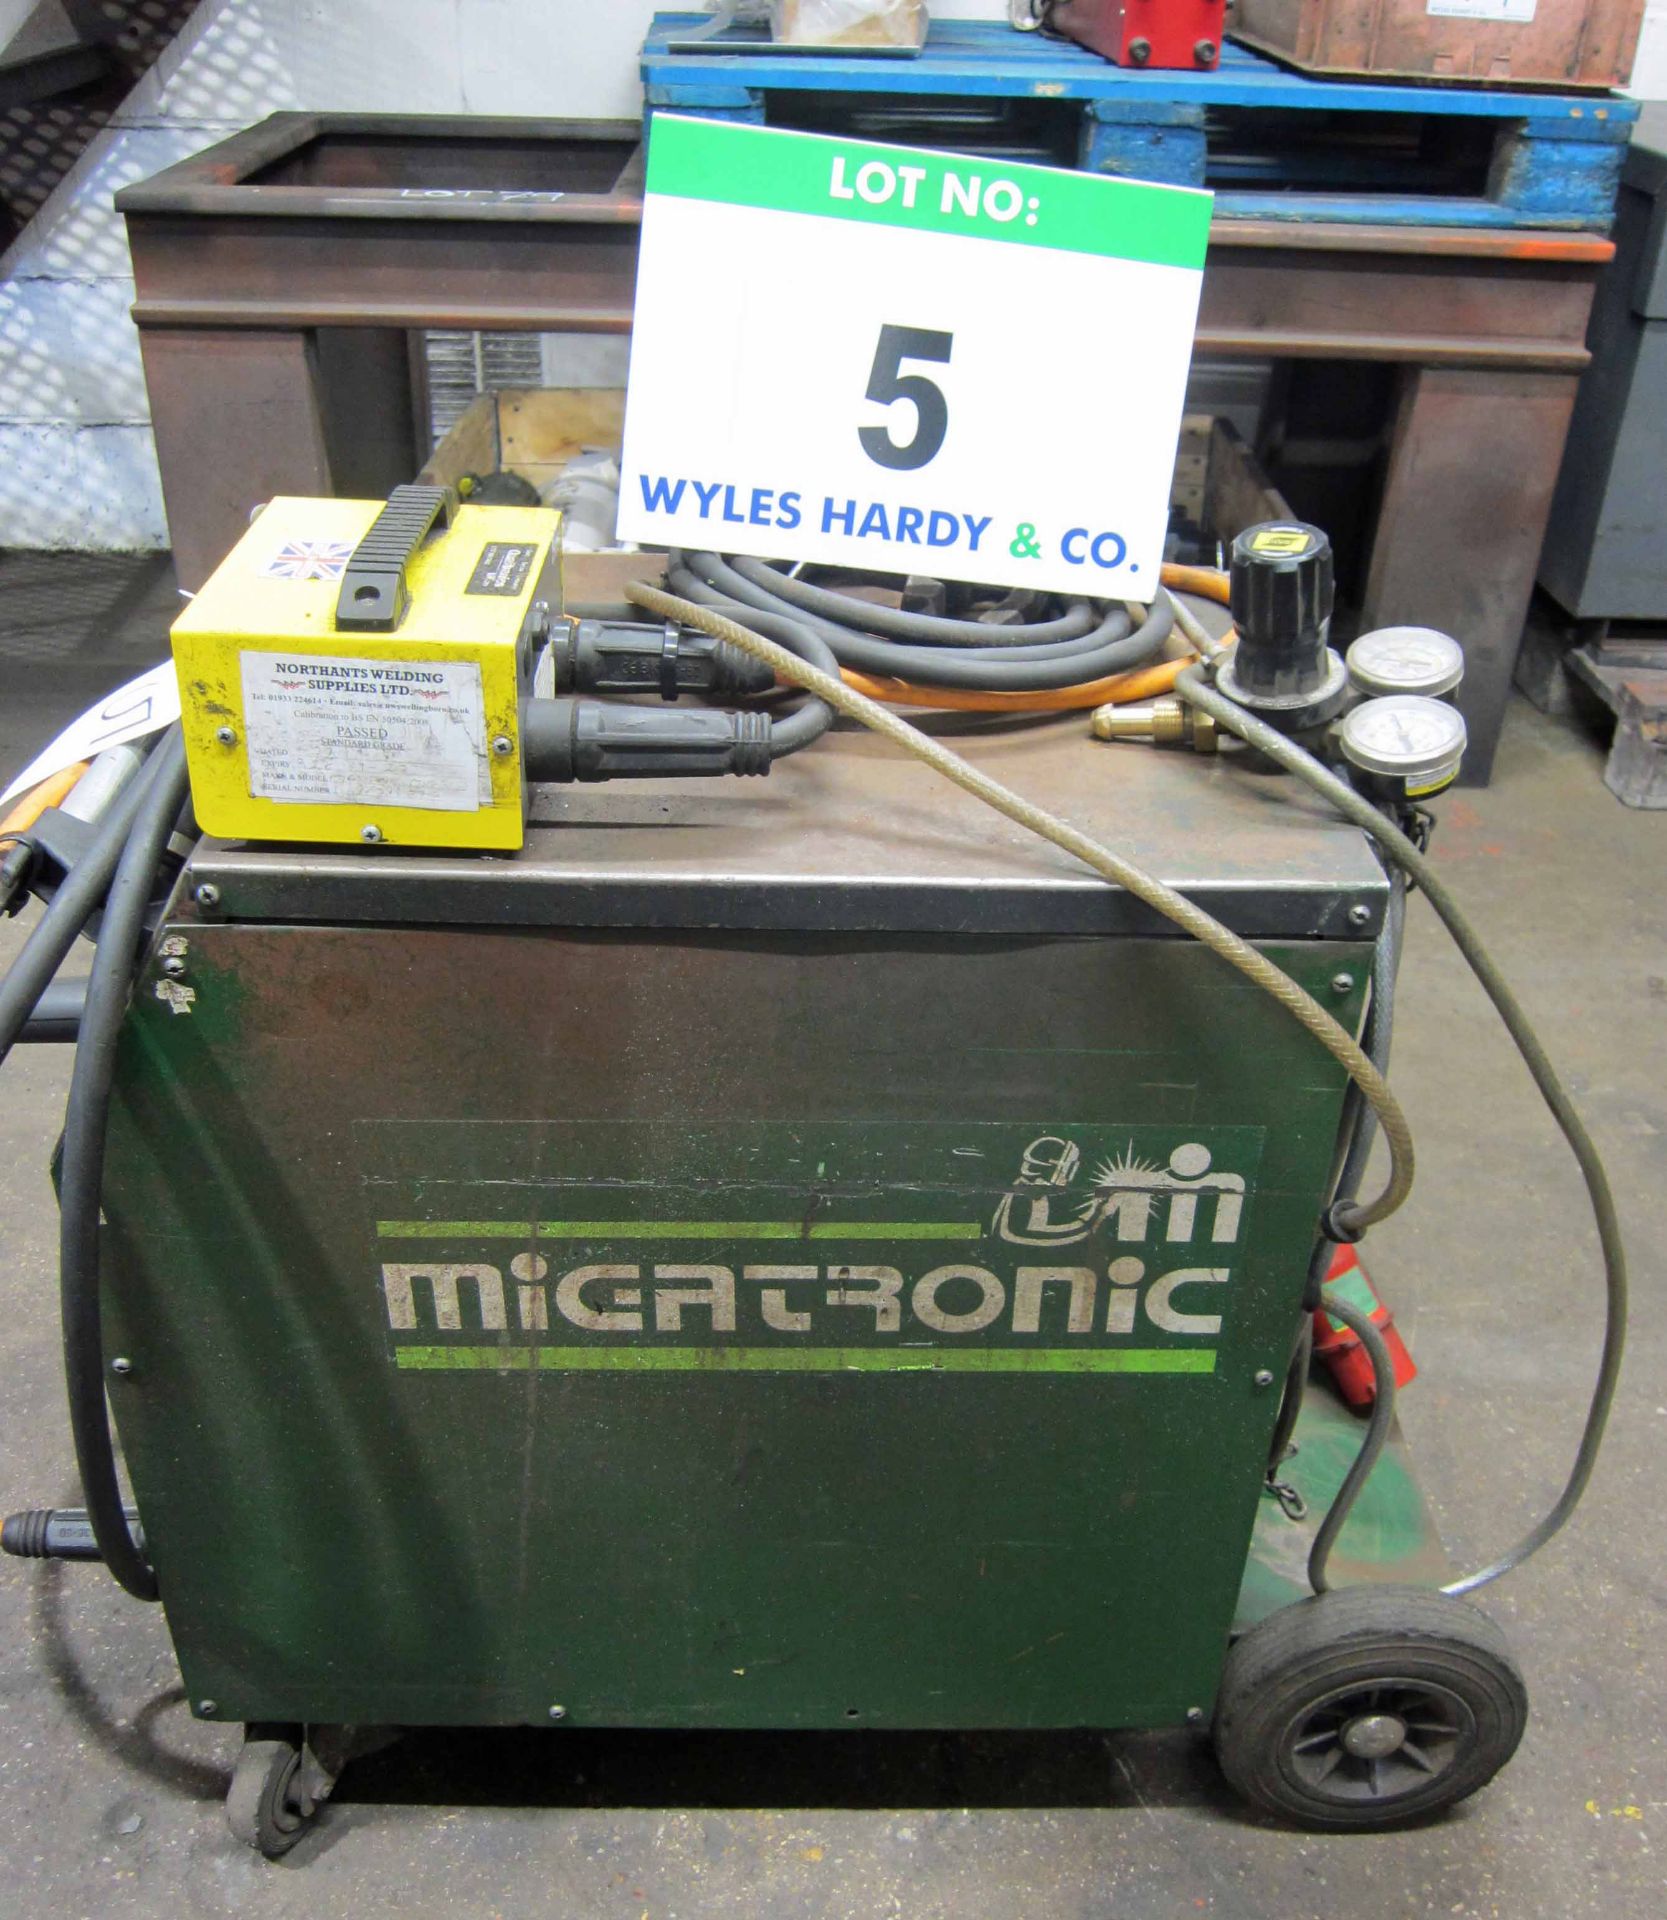 A MIGTRONIC Model Mig 300 Mig Welder complete with QUALITRONICS Voltage and Amp Meters and Gun, - Bild 5 aus 6